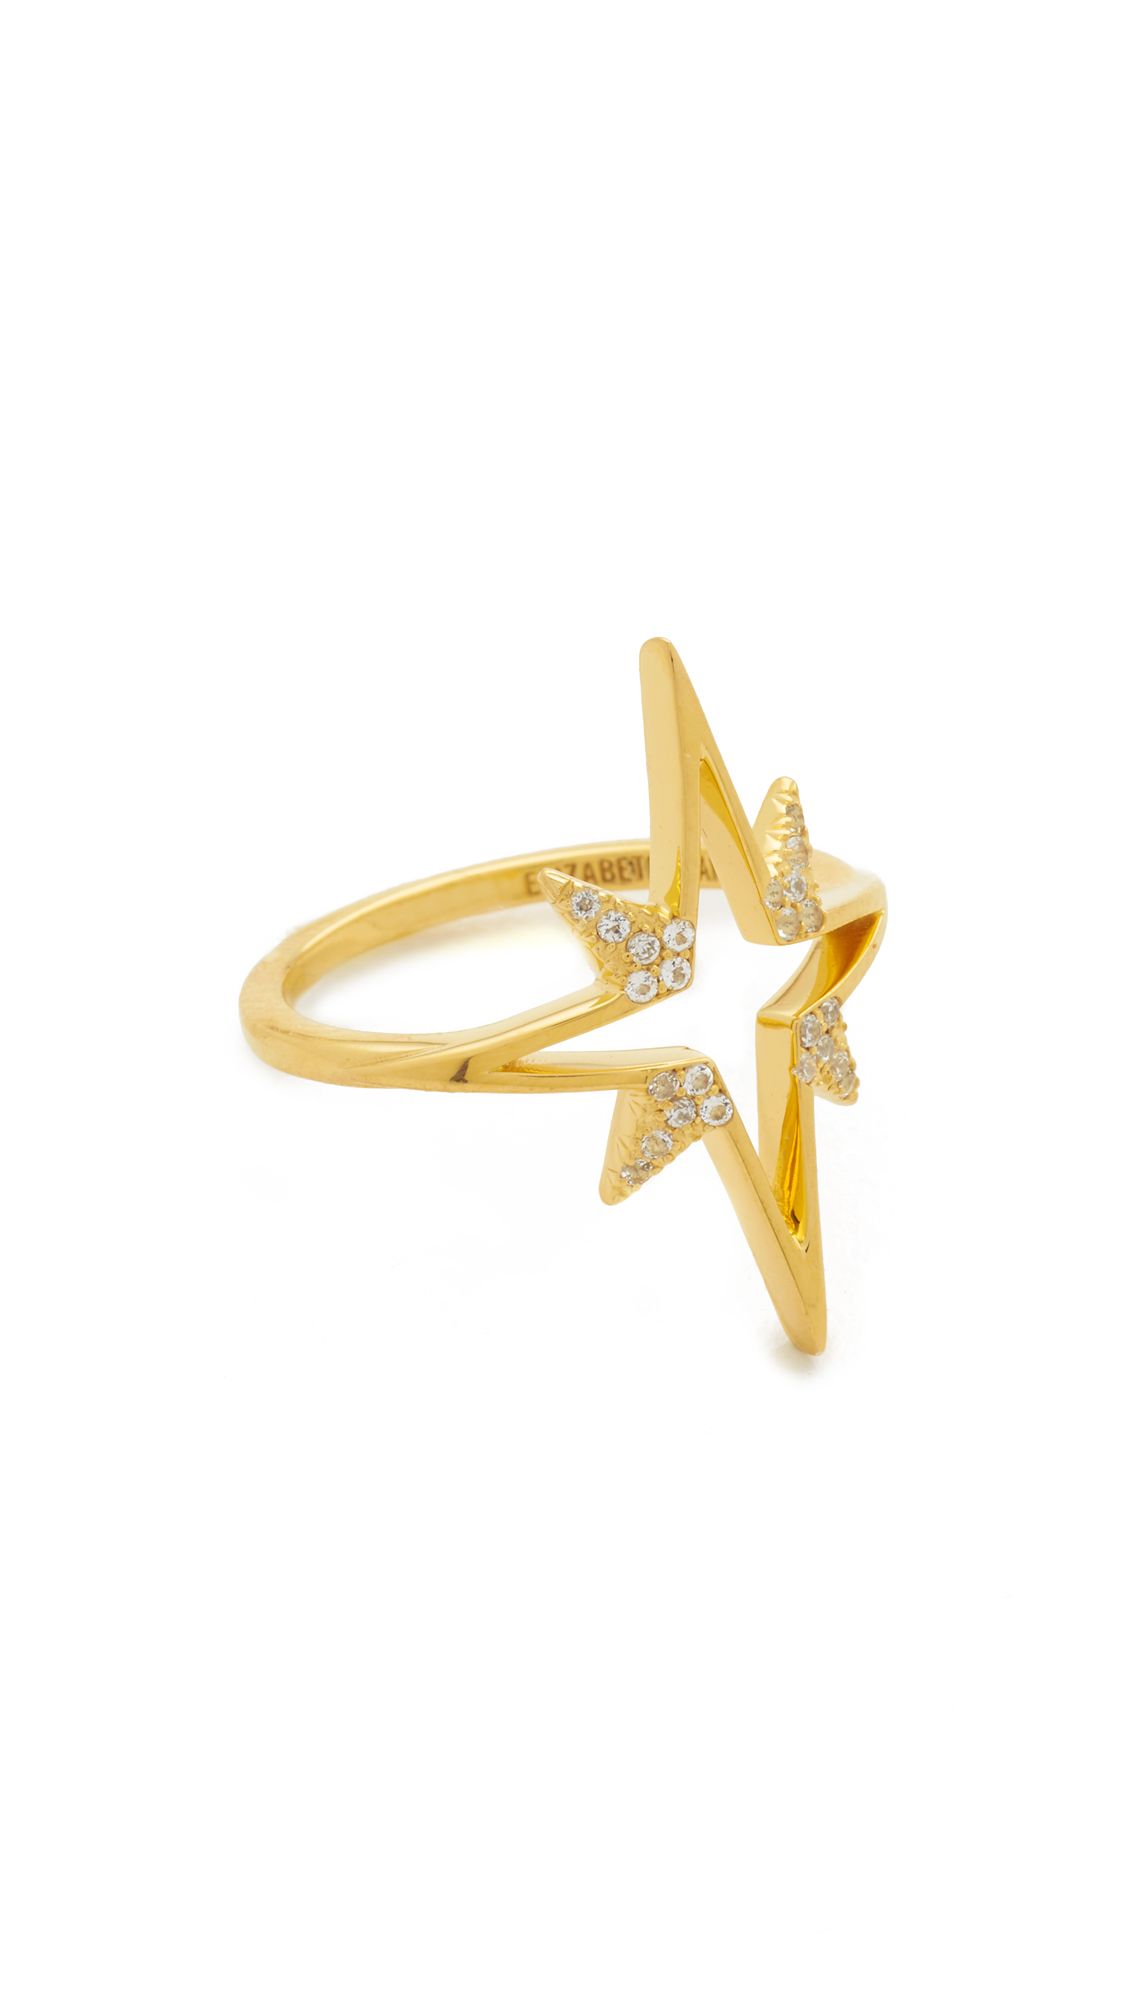 Astral Ring | Shopbop